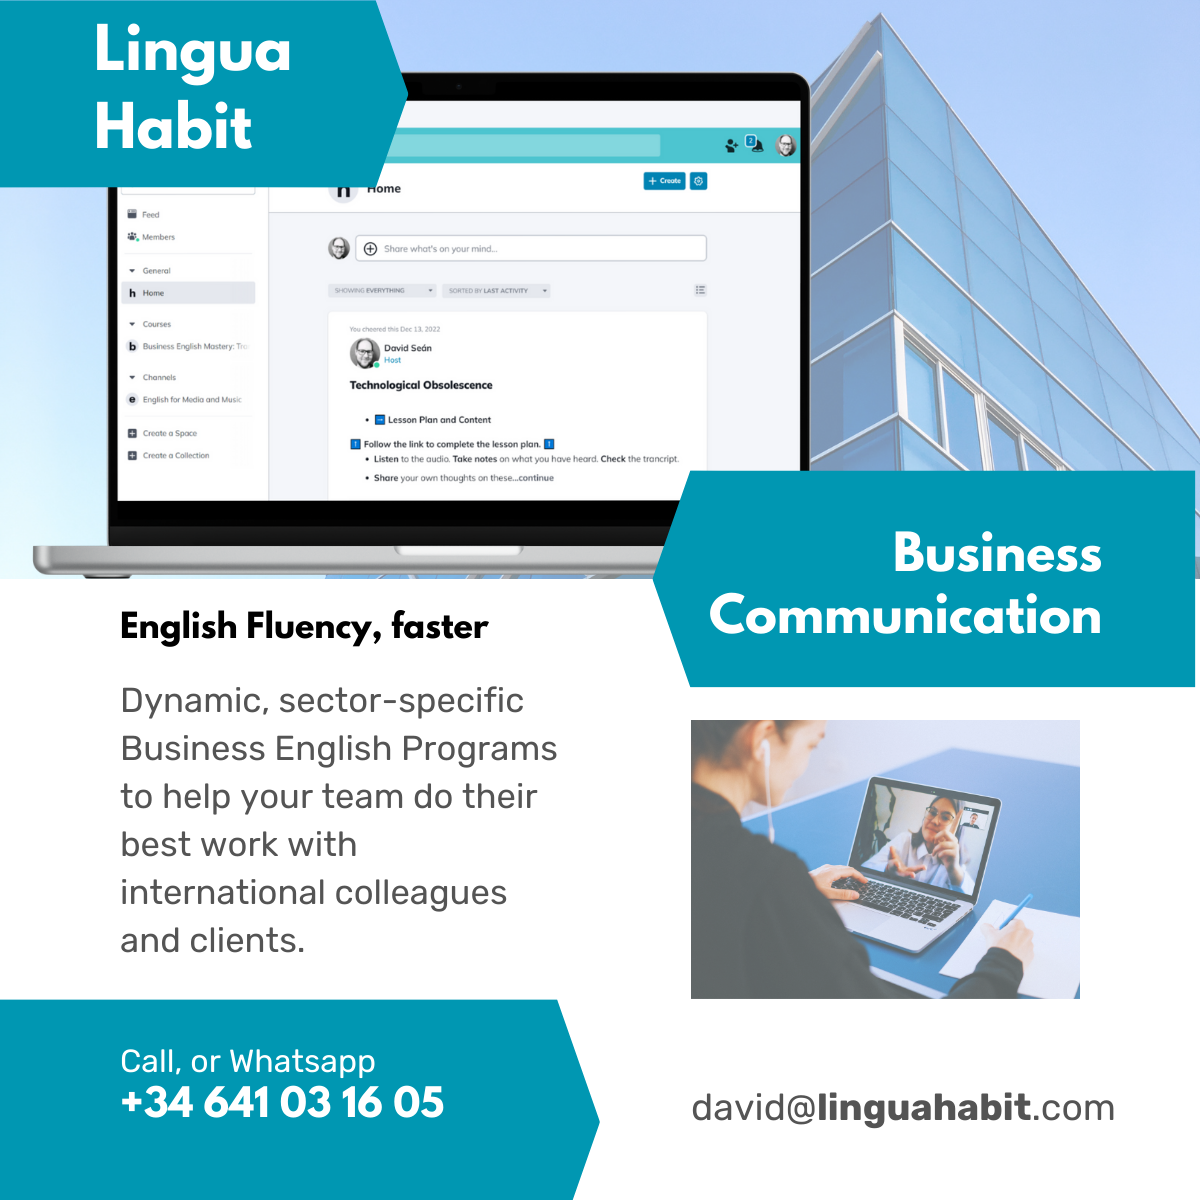 Lingua Habit B2B. Do your best work with international colleagues and clients.